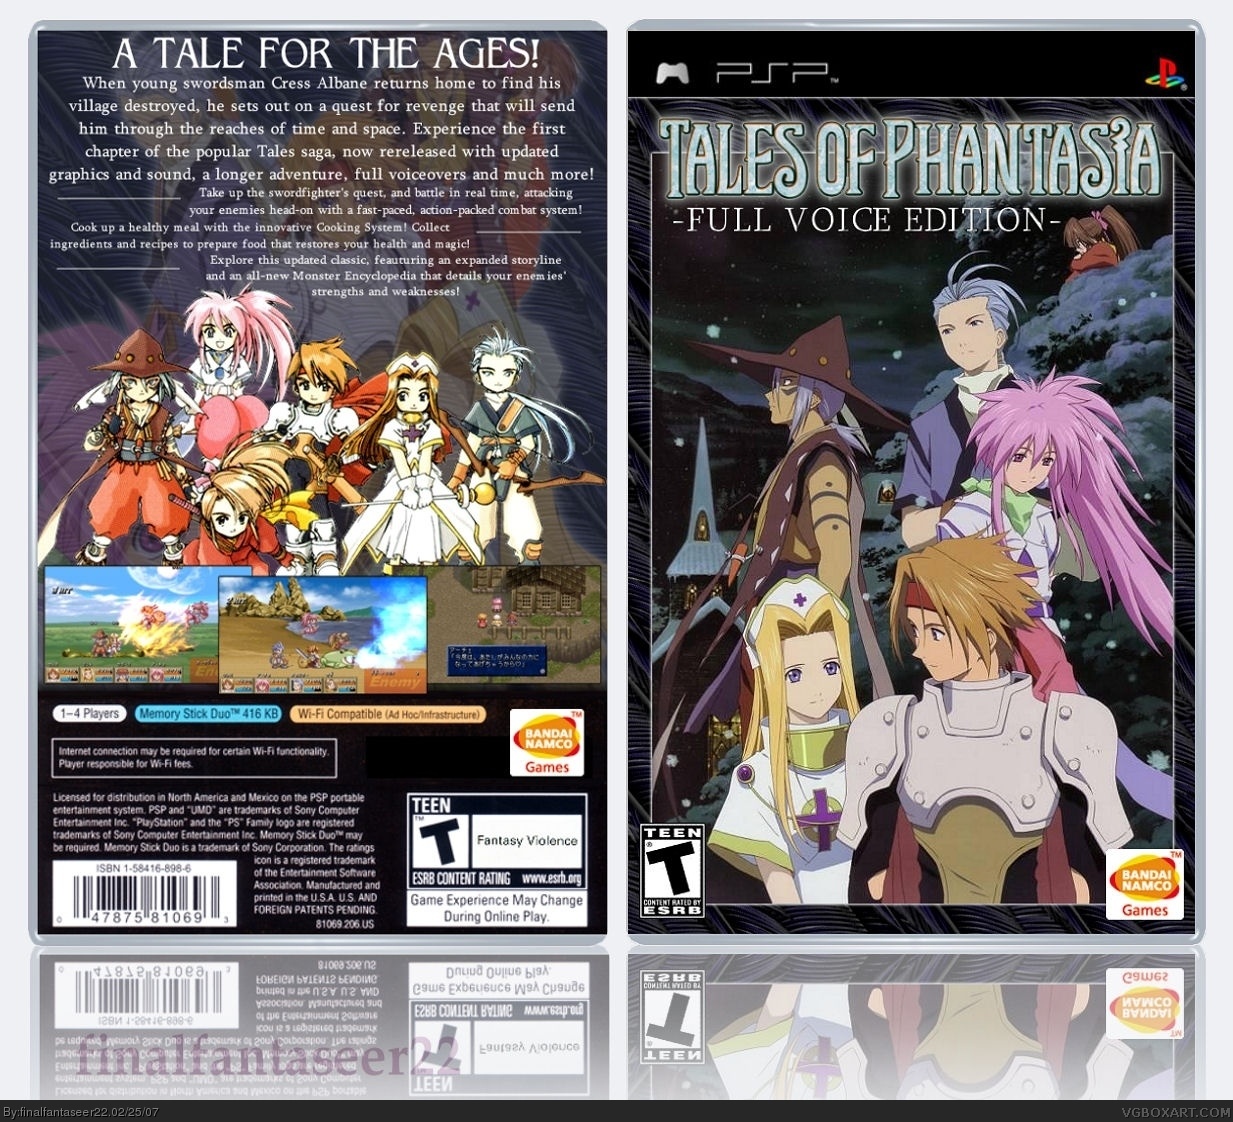 download tales of phantasia full voice edition english